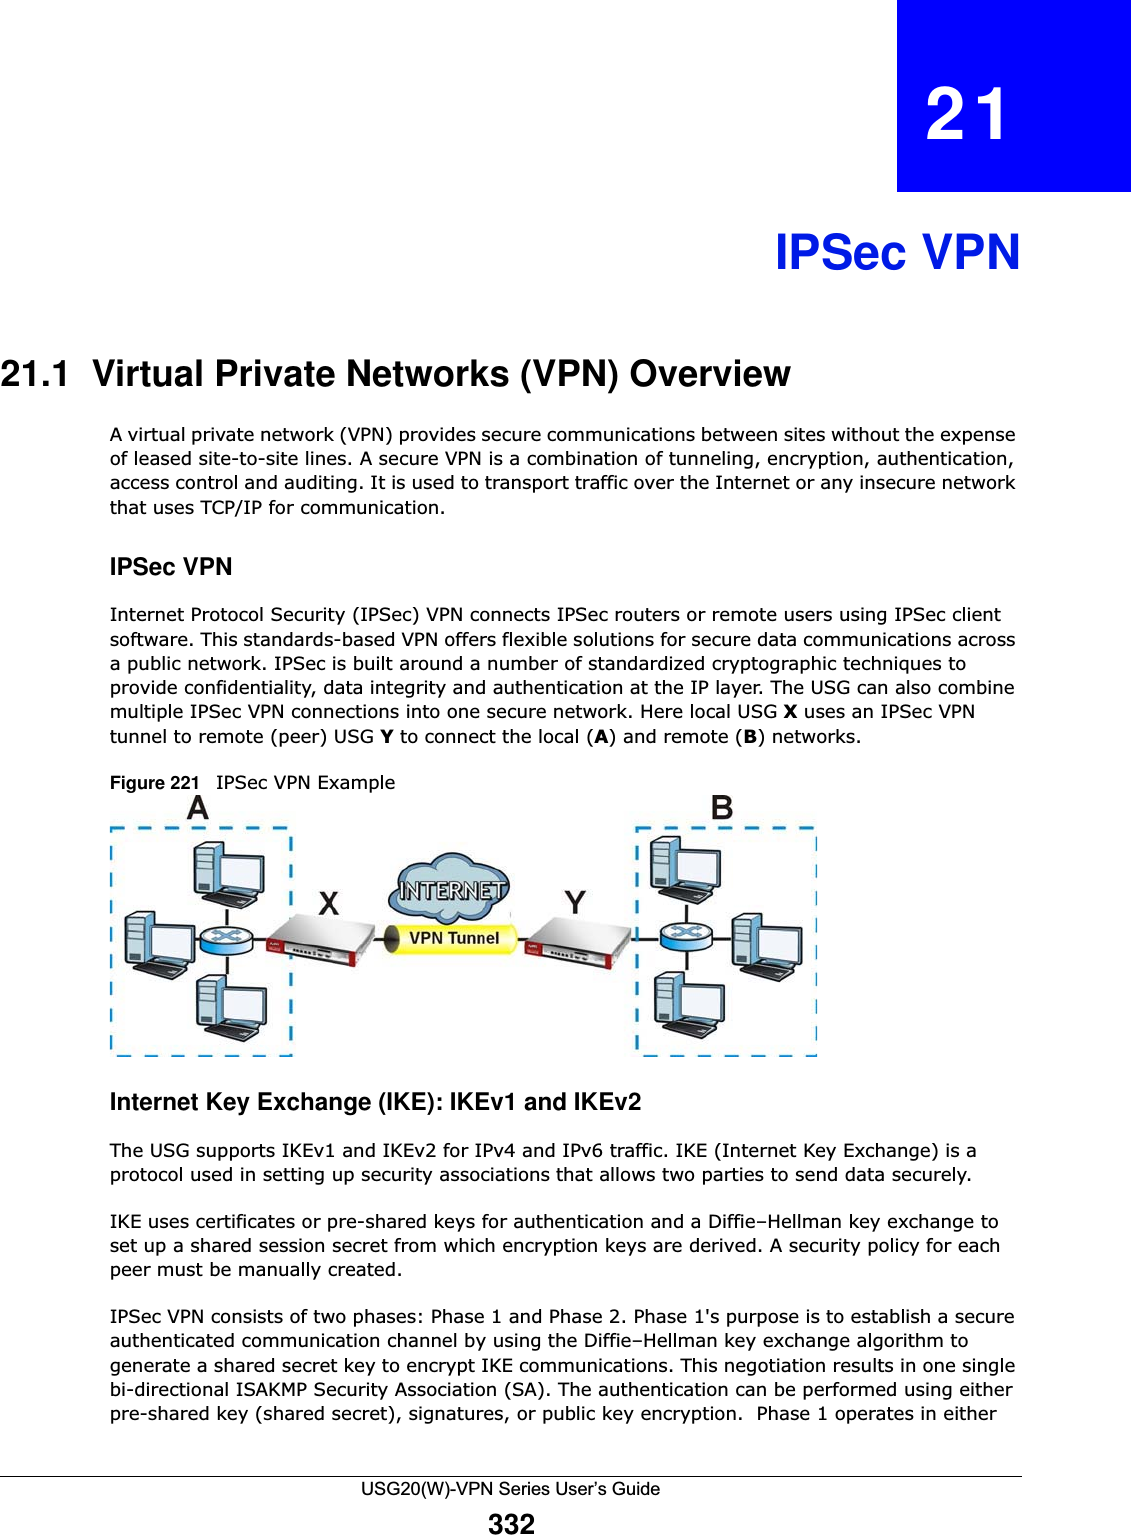 USG20(W)-VPN Series User’s Guide332CHAPTER   21IPSec VPN21.1  Virtual Private Networks (VPN) OverviewA virtual private network (VPN) provides secure communications between sites without the expense of leased site-to-site lines. A secure VPN is a combination of tunneling, encryption, authentication, access control and auditing. It is used to transport traffic over the Internet or any insecure network that uses TCP/IP for communication.IPSec VPNInternet Protocol Security (IPSec) VPN connects IPSec routers or remote users using IPSec client software. This standards-based VPN offers flexible solutions for secure data communications across a public network. IPSec is built around a number of standardized cryptographic techniques to provide confidentiality, data integrity and authentication at the IP layer. The USG can also combine multiple IPSec VPN connections into one secure network. Here local USG X uses an IPSec VPN tunnel to remote (peer) USG Y to connect the local (A) and remote (B) networks.Figure 221   IPSec VPN ExampleInternet Key Exchange (IKE): IKEv1 and IKEv2The USG supports IKEv1 and IKEv2 for IPv4 and IPv6 traffic. IKE (Internet Key Exchange) is a protocol used in setting up security associations that allows two parties to send data securely.IKE uses certificates or pre-shared keys for authentication and a Diffie–Hellman key exchange to set up a shared session secret from which encryption keys are derived. A security policy for each peer must be manually created.IPSec VPN consists of two phases: Phase 1 and Phase 2. Phase 1&apos;s purpose is to establish a secure authenticated communication channel by using the Diffie–Hellman key exchange algorithm to generate a shared secret key to encrypt IKE communications. This negotiation results in one single bi-directional ISAKMP Security Association (SA). The authentication can be performed using either pre-shared key (shared secret), signatures, or public key encryption.  Phase 1 operates in either 